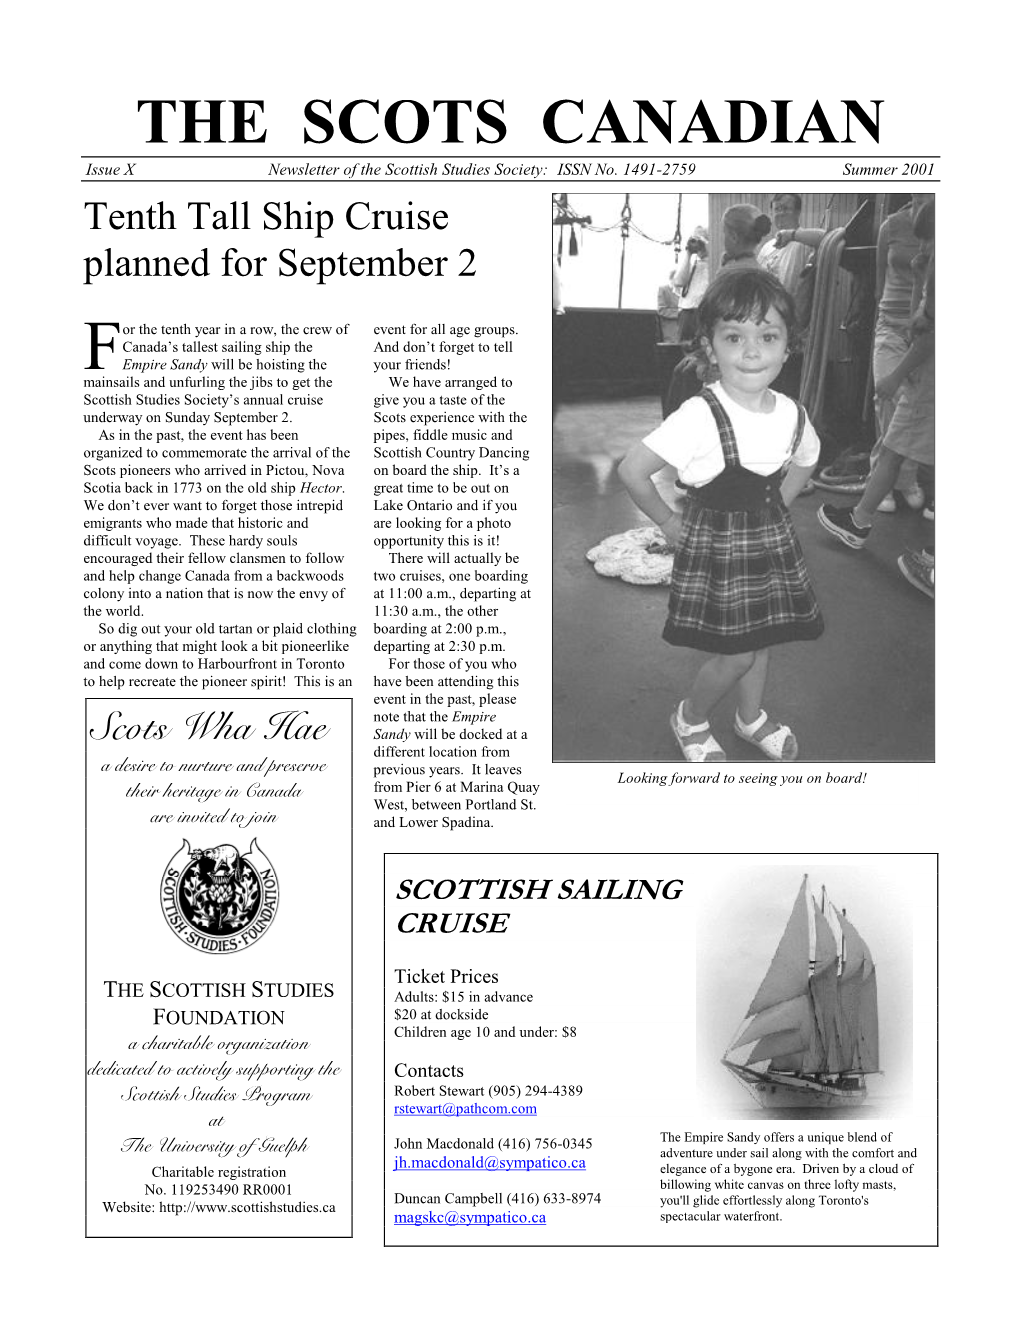 Summer 2001 Tenth Tall Ship Cruise Planned for September 2